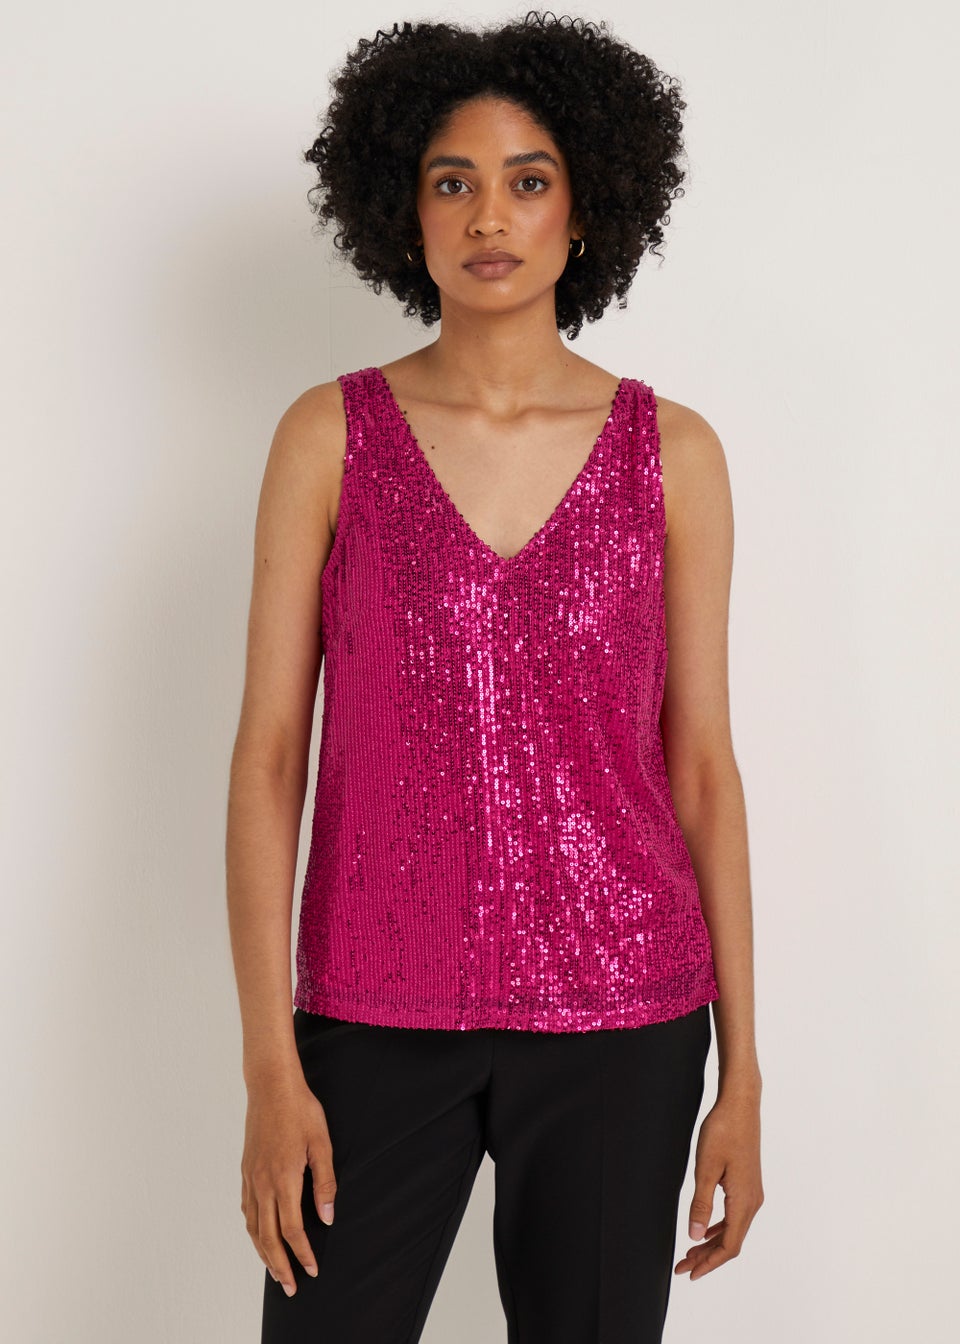 Inside New meaning latch matalan sequin top outer mud Peru